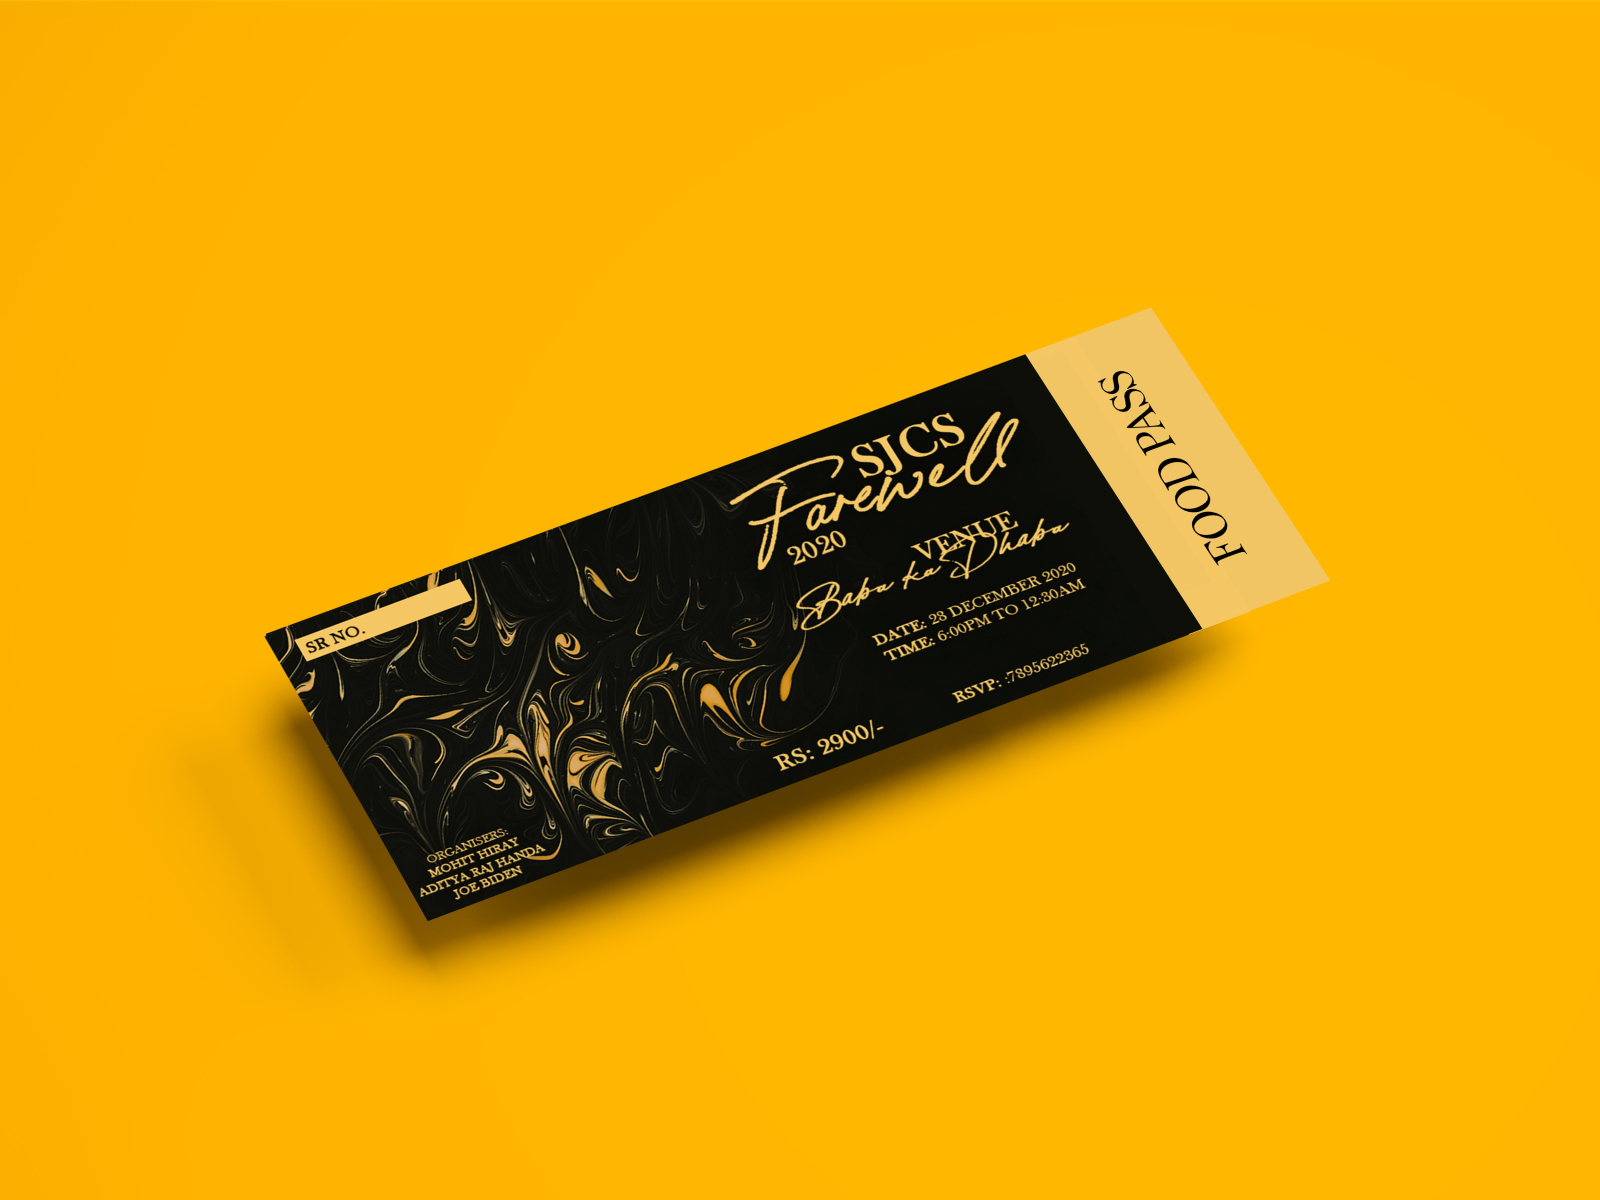 Farewell Entry Ticket/Pass design by Mohit Hiray on Dribbble